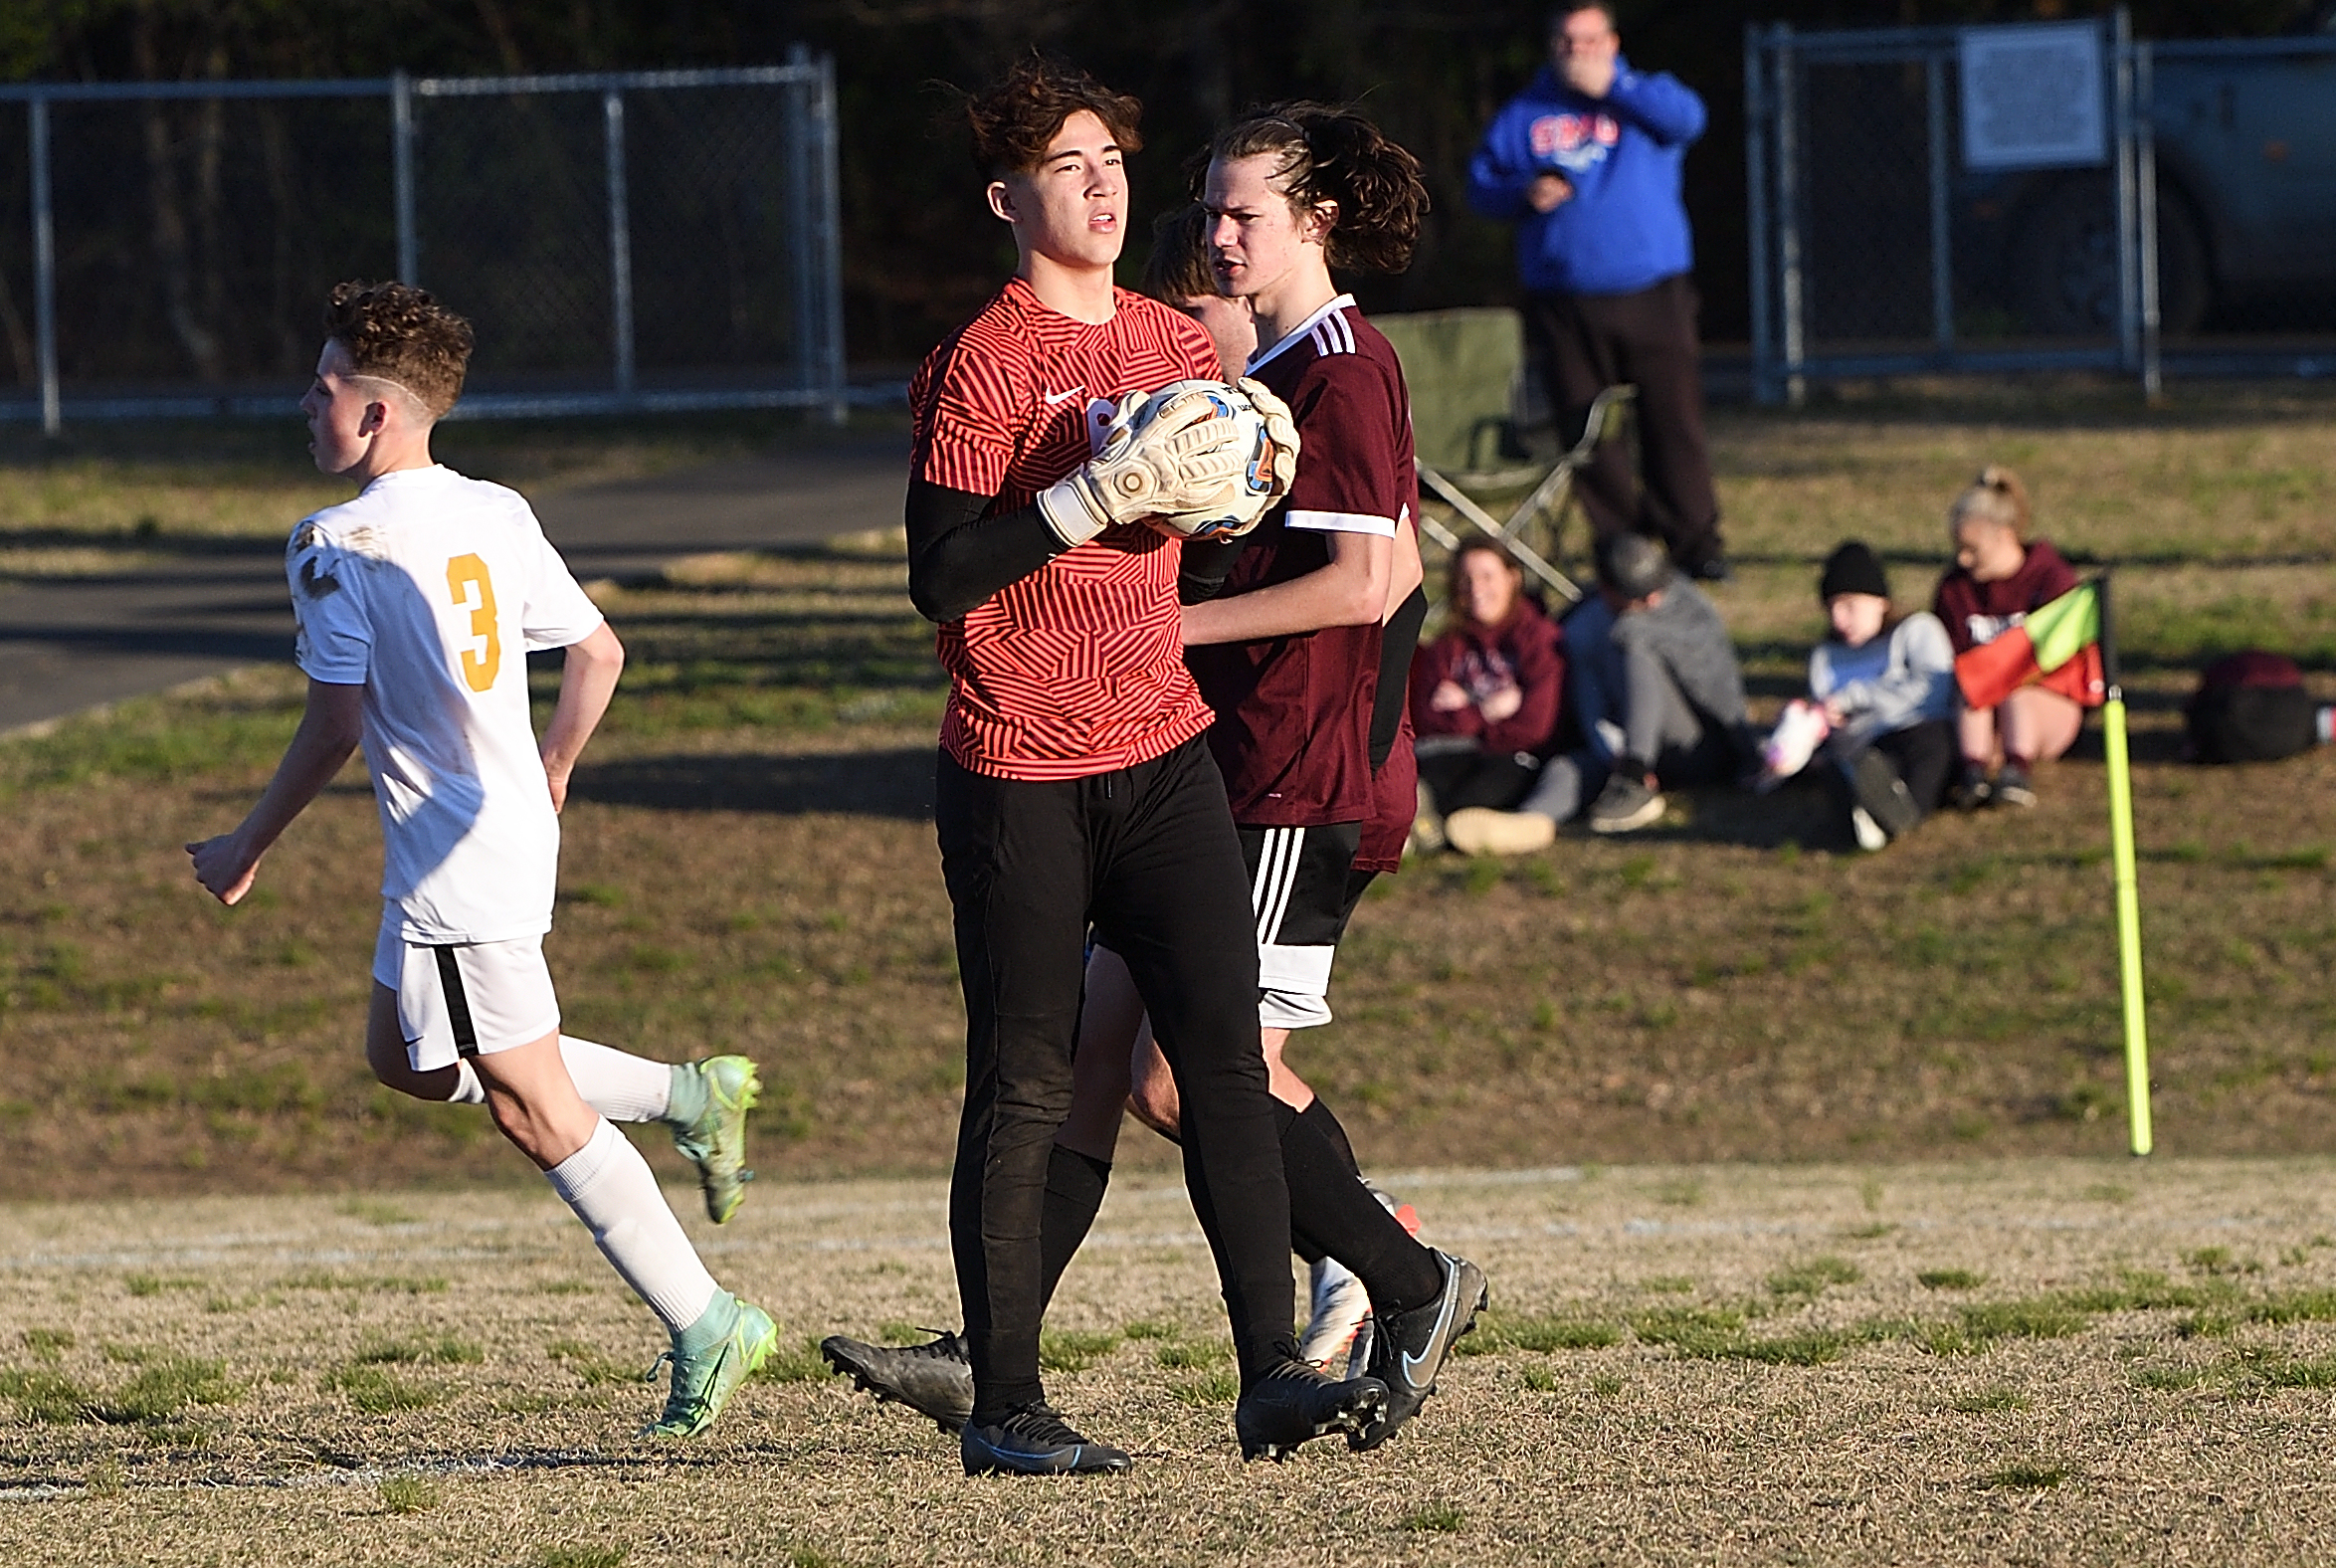 Donoho coach Tim Melton said keeper Richard Goad, a first-year soccer player, played his best game of the season “by far” in Saturday’s county title game. (Photo by B.J. Franklin/GungHo Photos)